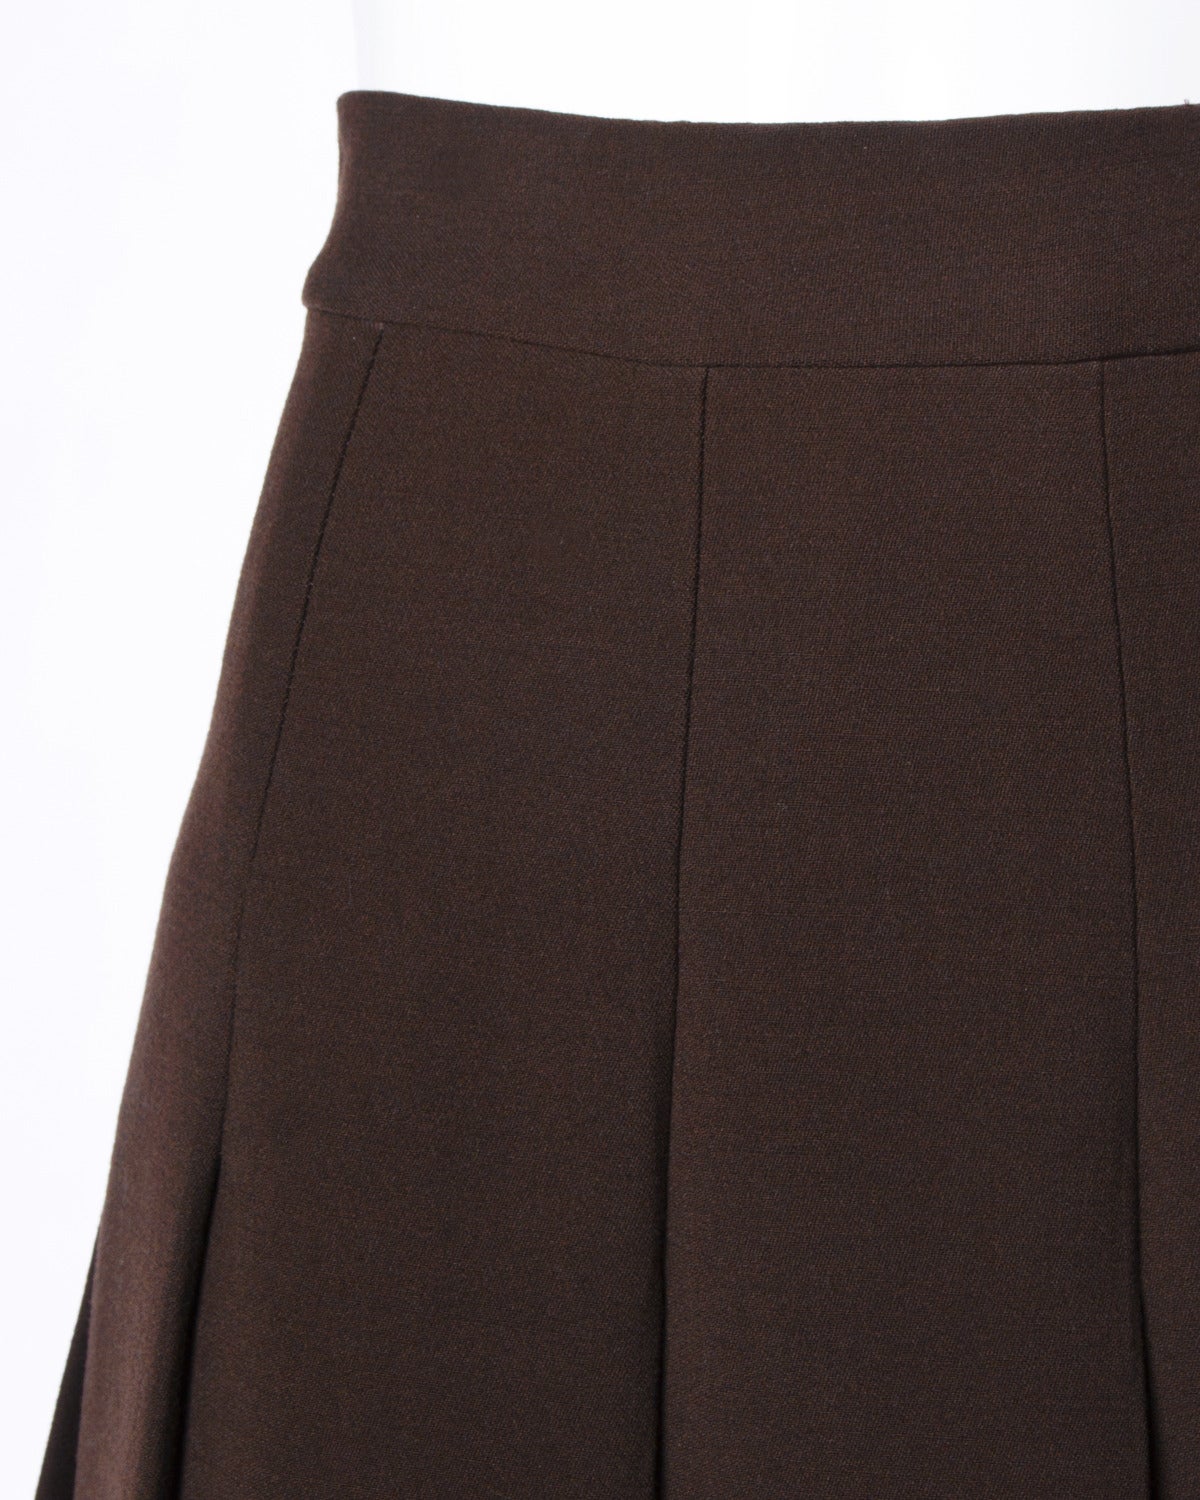 Absolutely stunning couture construction! Vintage brown wool skirt with pristine pleats and silk lining by Renato Balestra. The quality of this piece is just gorgeous in person.

Details:

Partially Lined
Back Snap and Hook Closure
Marked